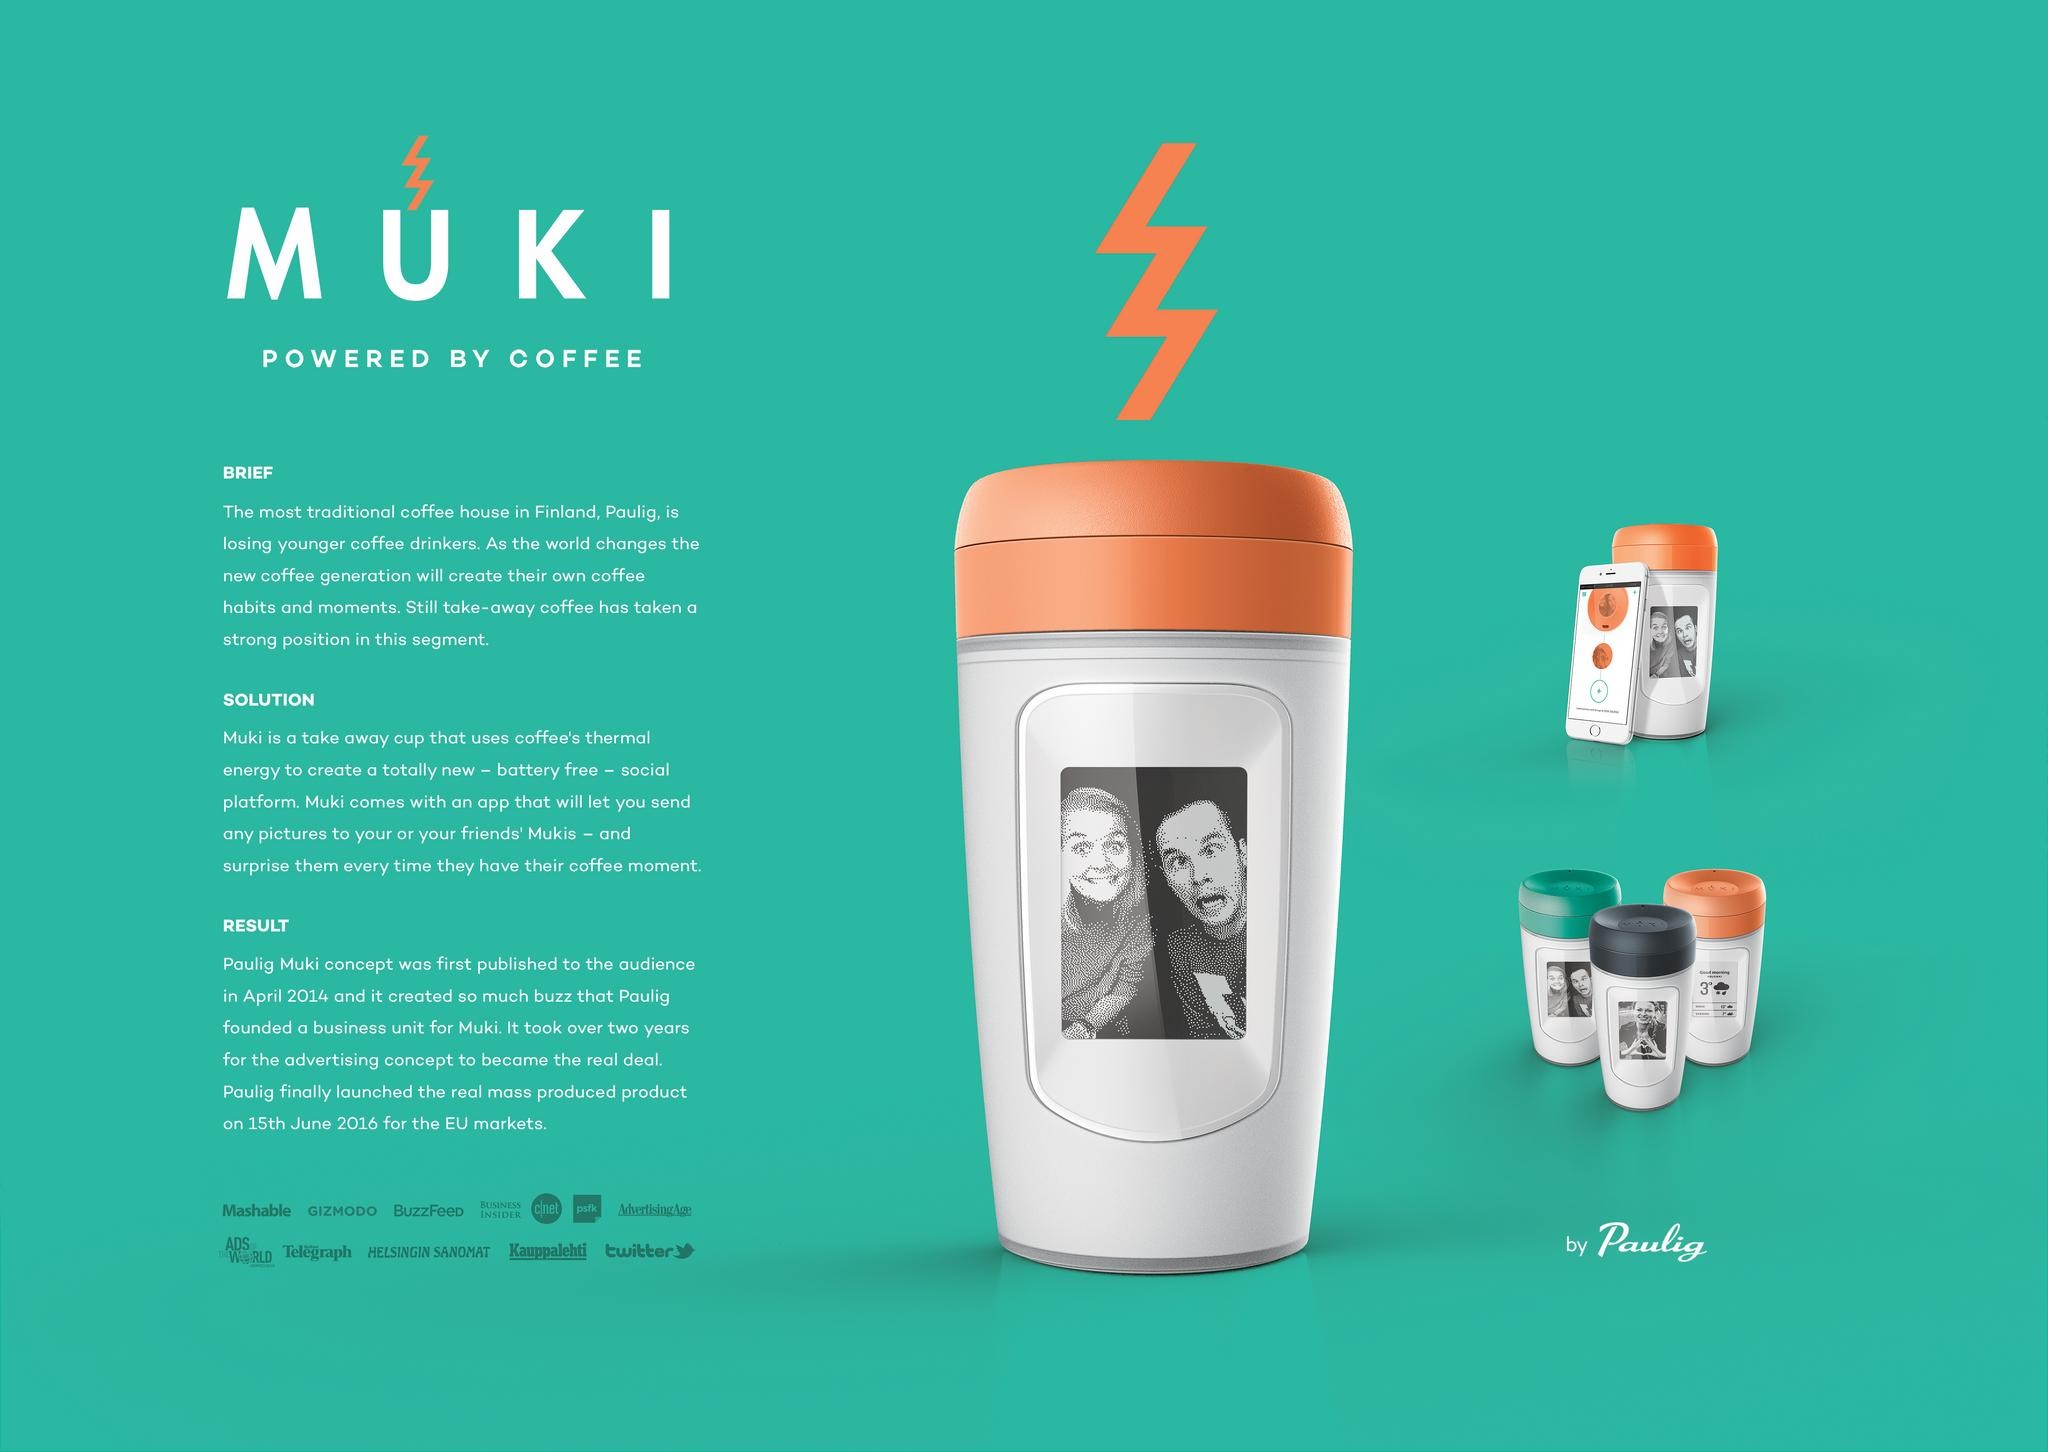 Paulig Muki - A smart coffee cup that is powered by coffee